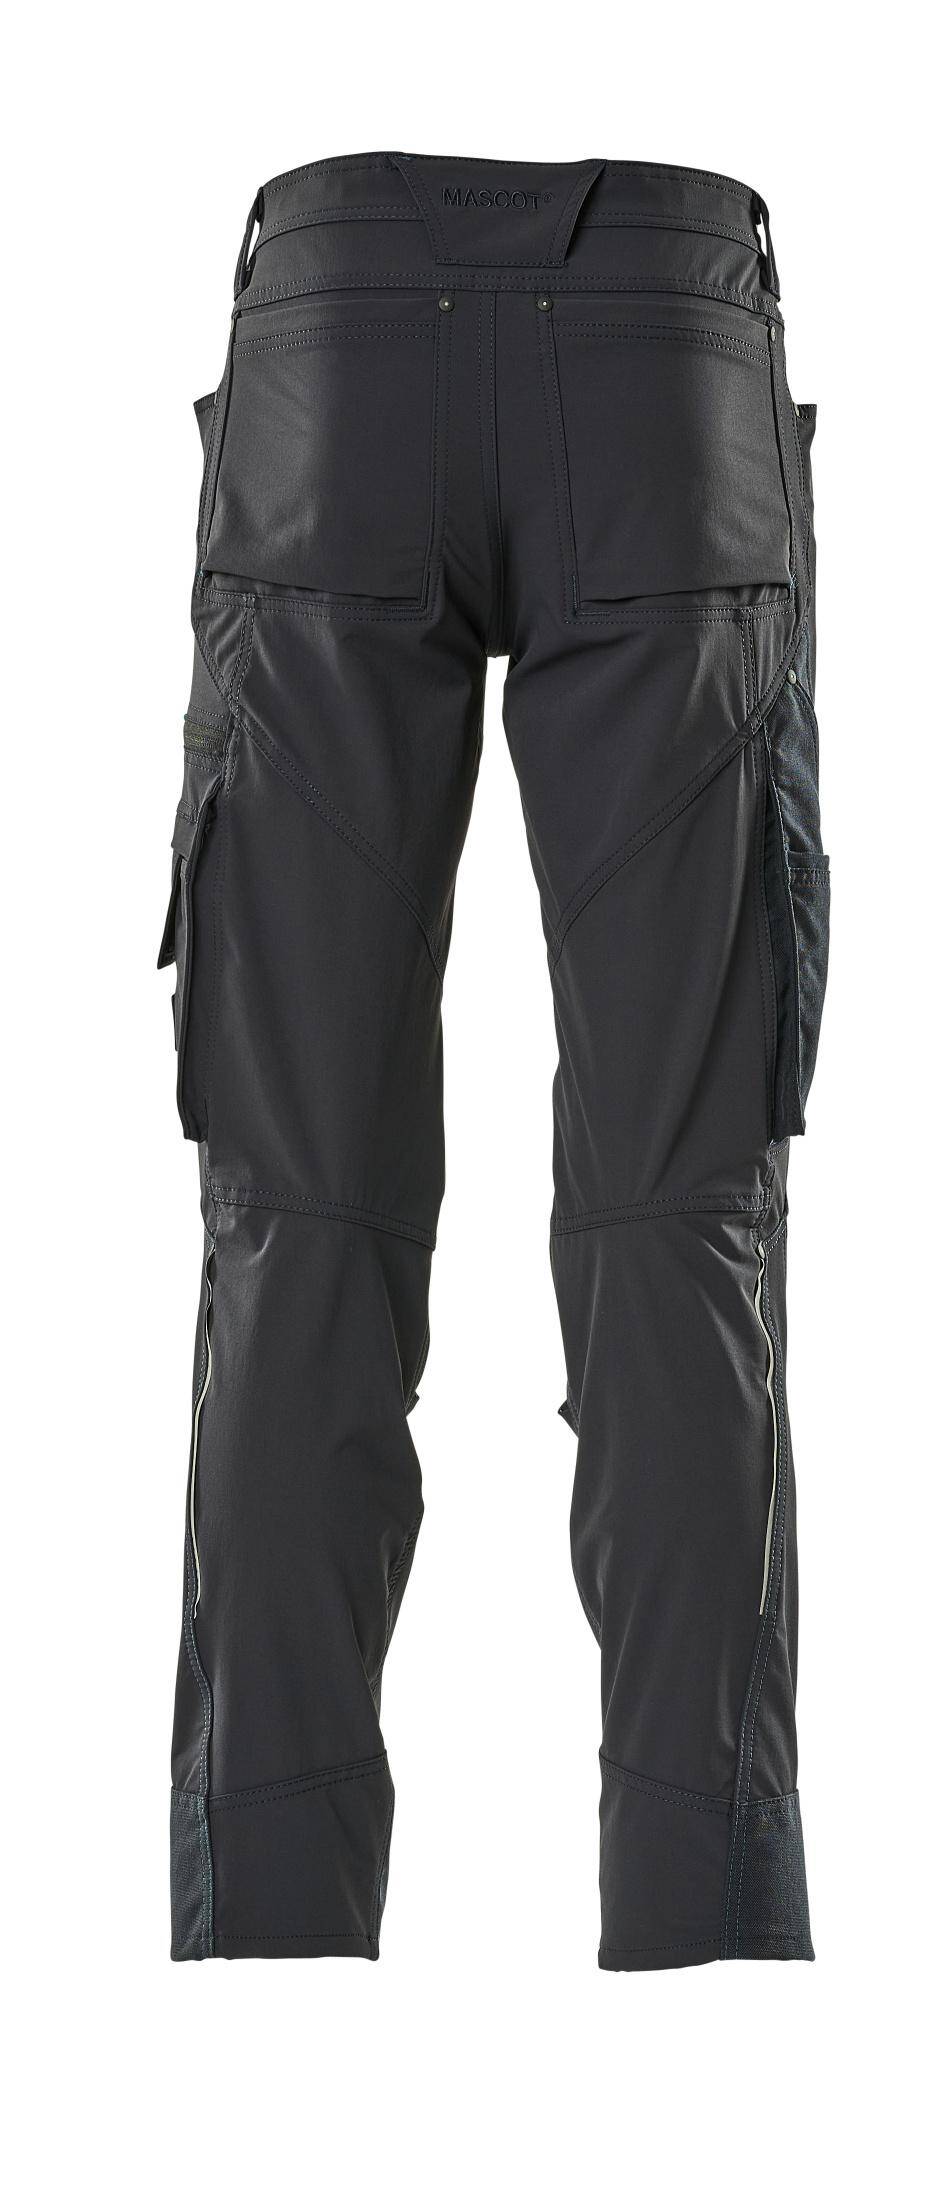 Trousers with kneepad pockets Advanced navy blue (Photo 3)